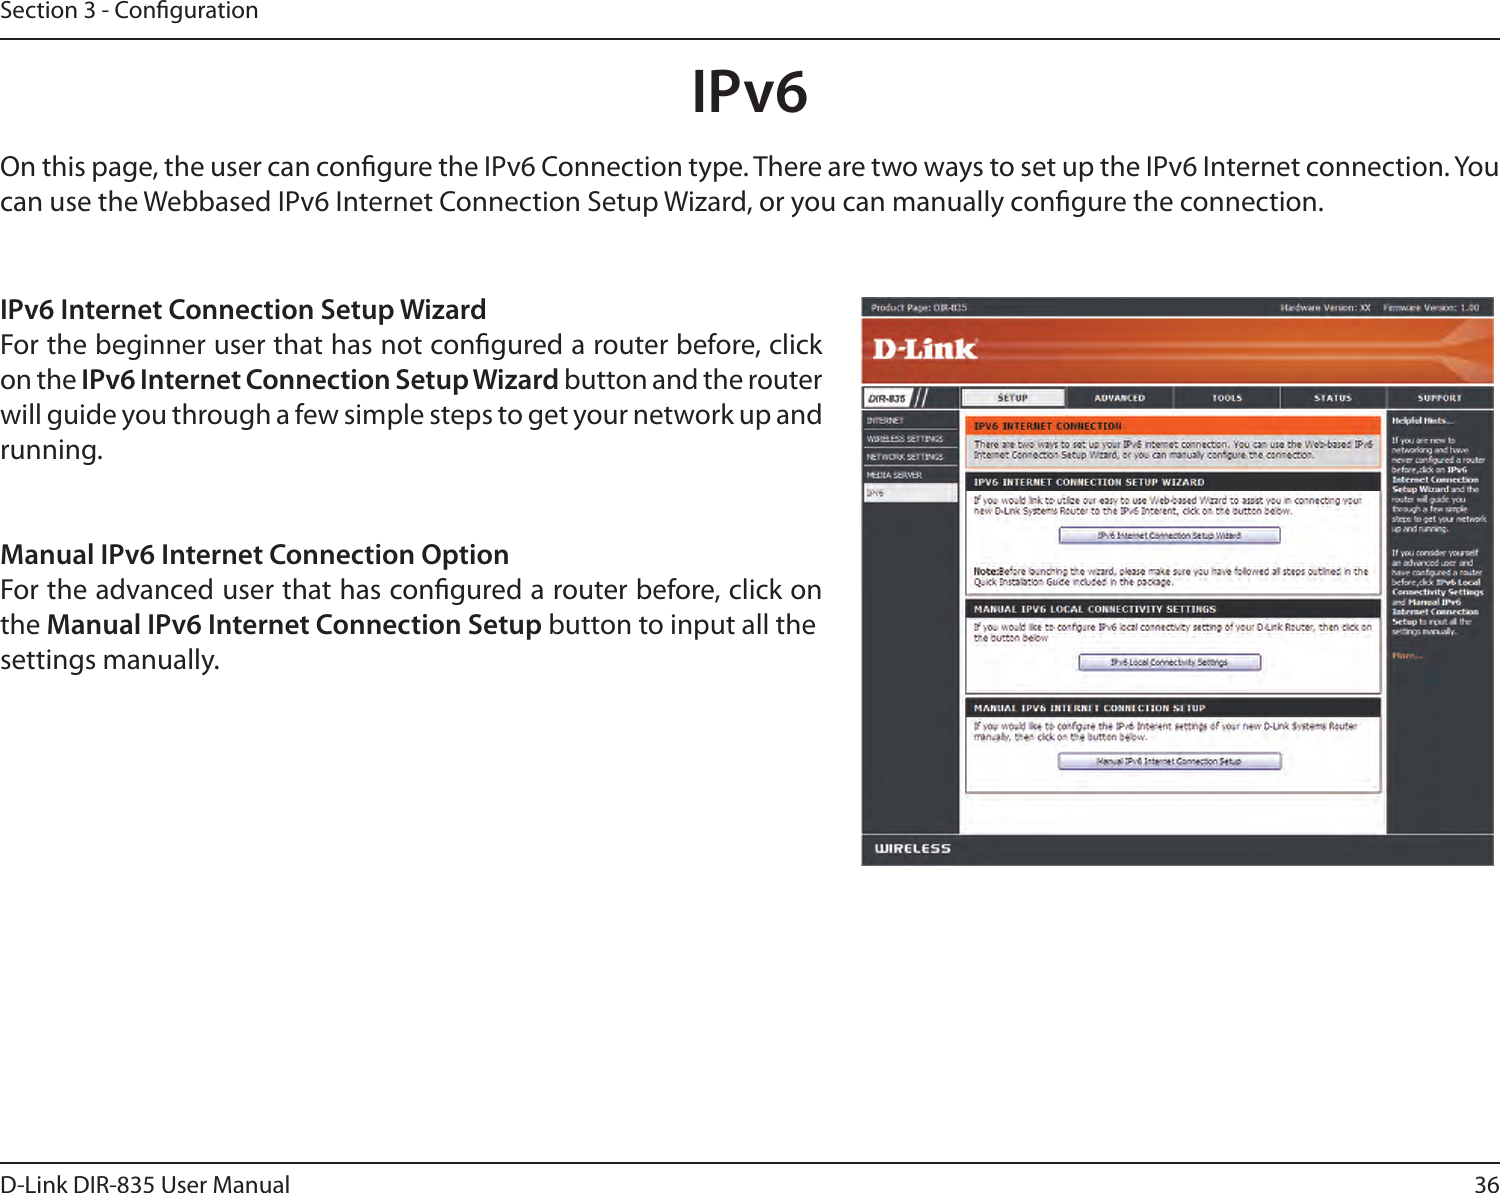 36D-Link DIR-835 User ManualSection 3 - CongurationIPv6On this page, the user can congure the IPv6 Connection type. There are two ways to set up the IPv6 Internet connection. You can use the Webbased IPv6 Internet Connection Setup Wizard, or you can manually congure the connection.IPv6 Internet Connection Setup WizardFor the beginner user that has not congured a router before, click on the IPv6 Internet Connection Setup Wizard button and the router will guide you through a few simple steps to get your network up andrunning.Manual IPv6 Internet Connection OptionFor the advanced user that has congured a router before, click on the Manual IPv6 Internet Connection Setup button to input all thesettings manually.